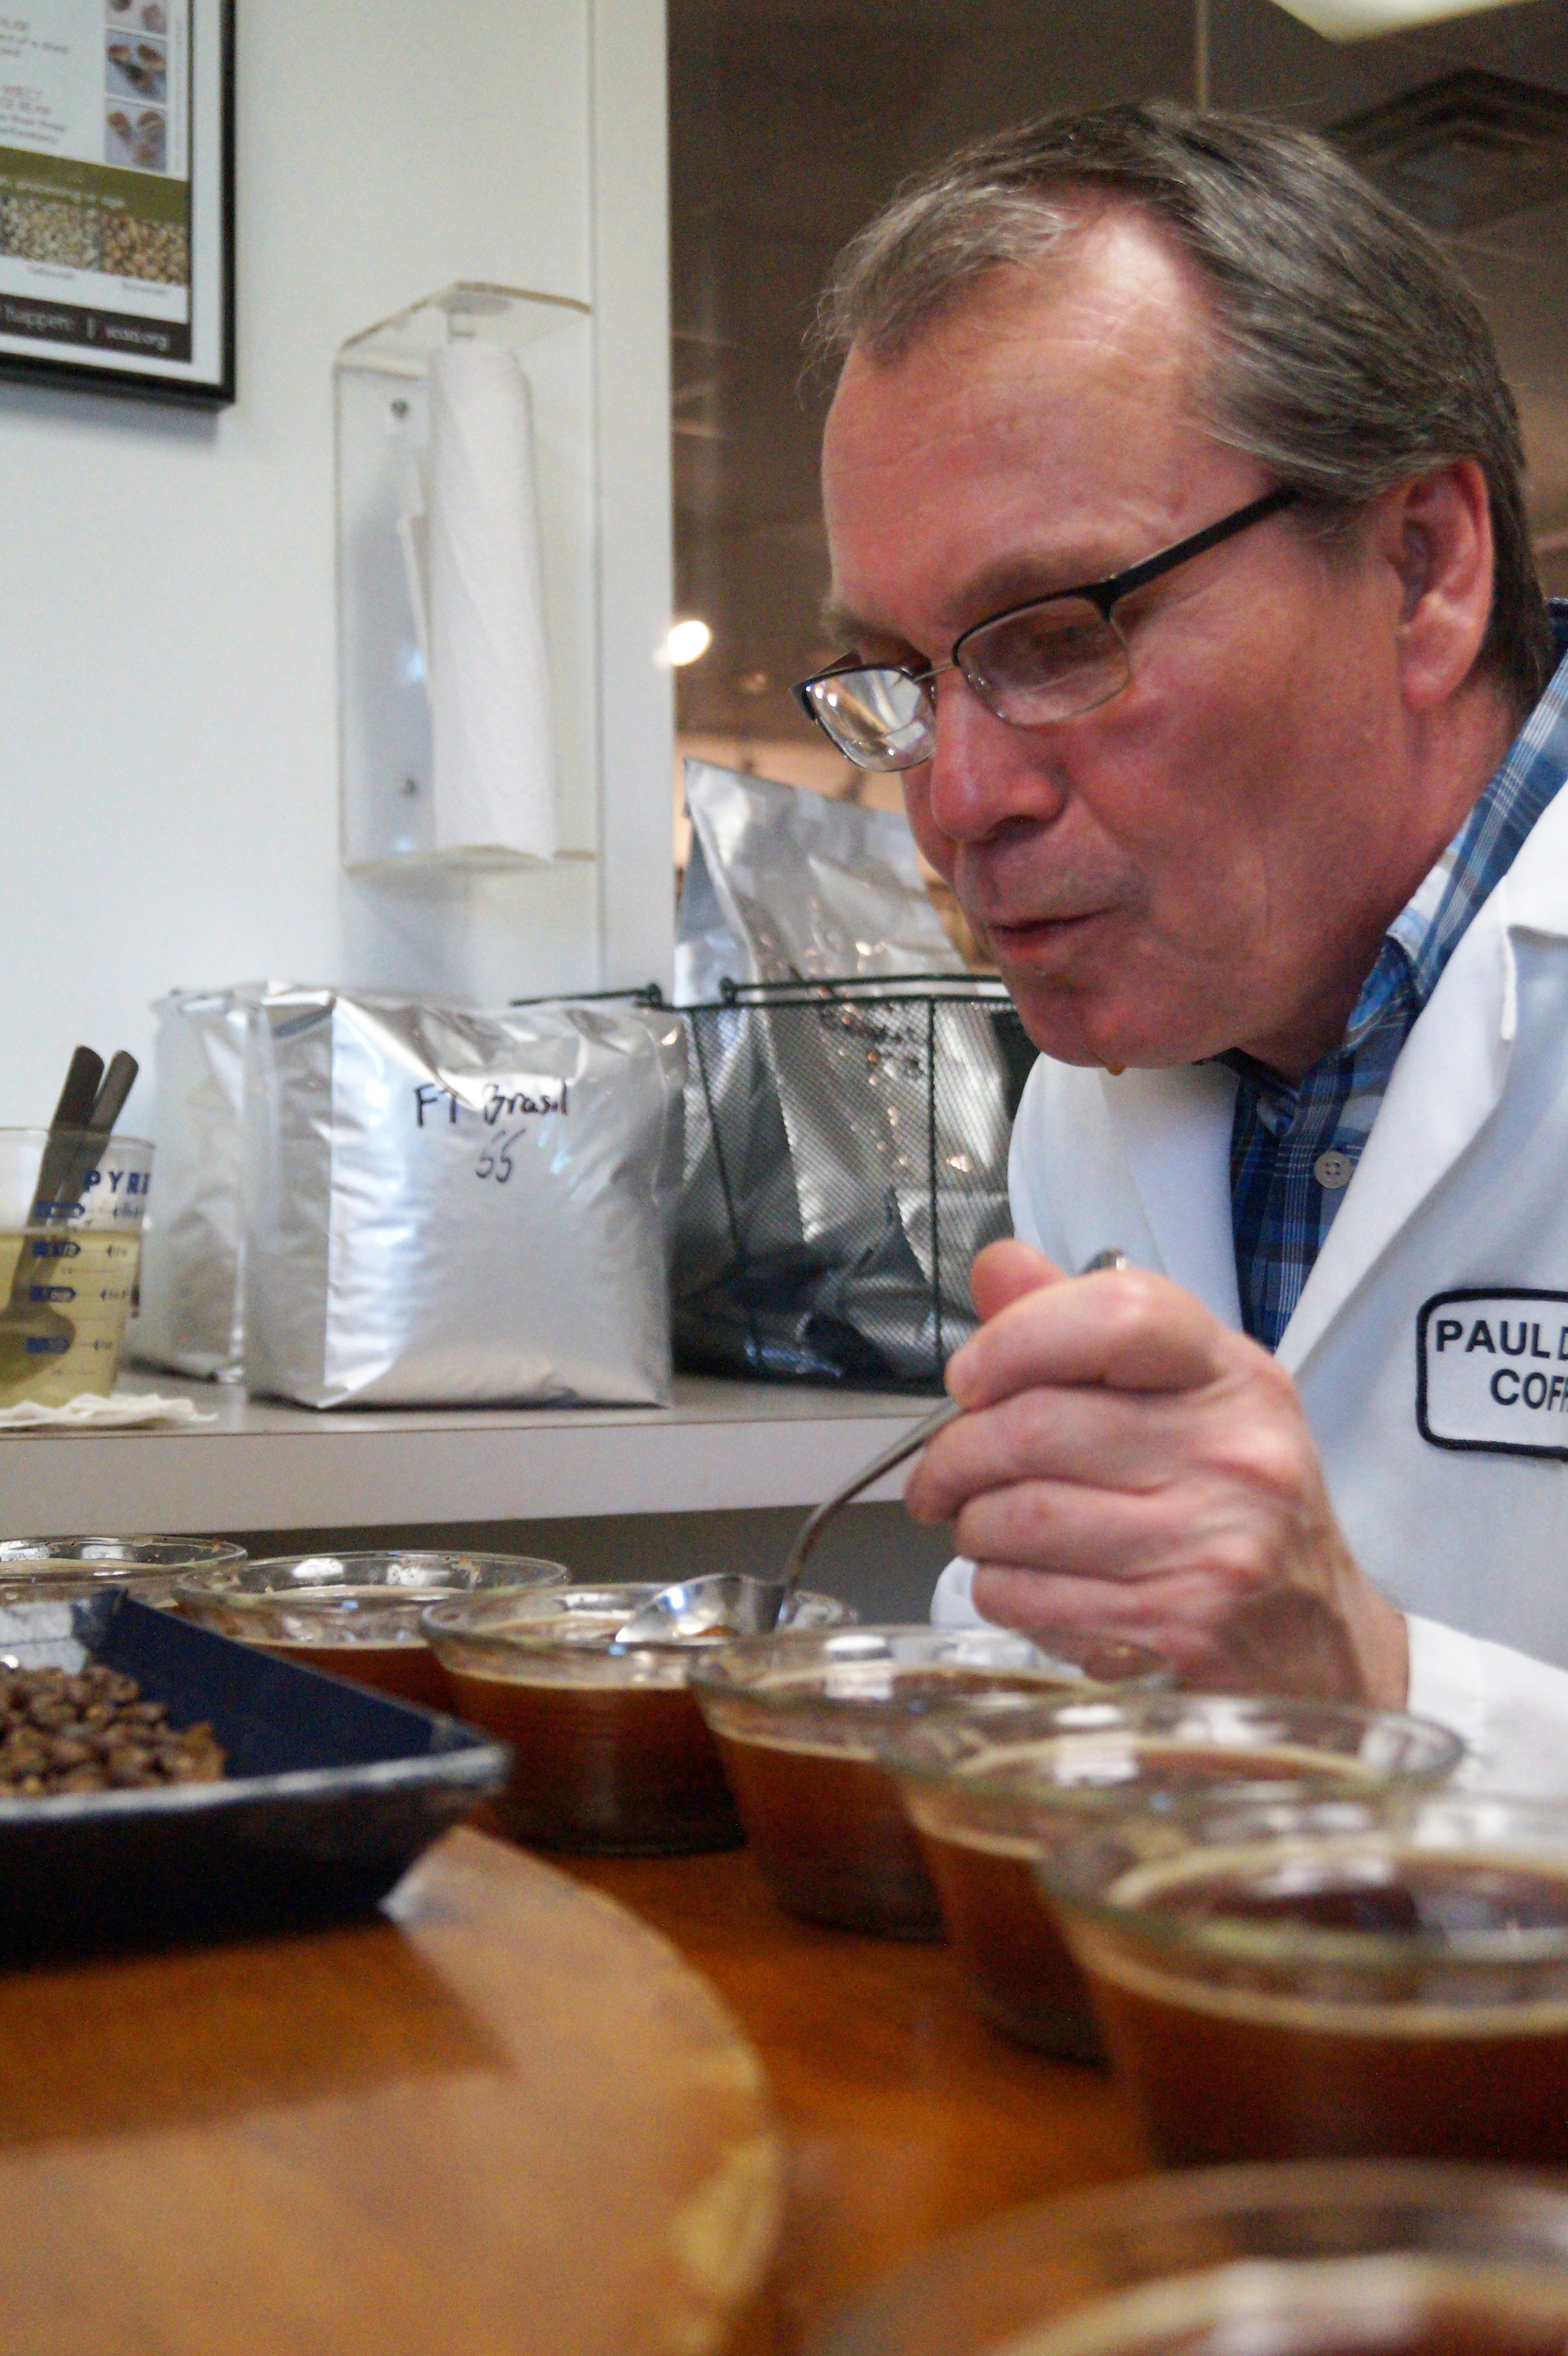 Glenn moving to a new coffee to try at Paul deLima during the cupping process.